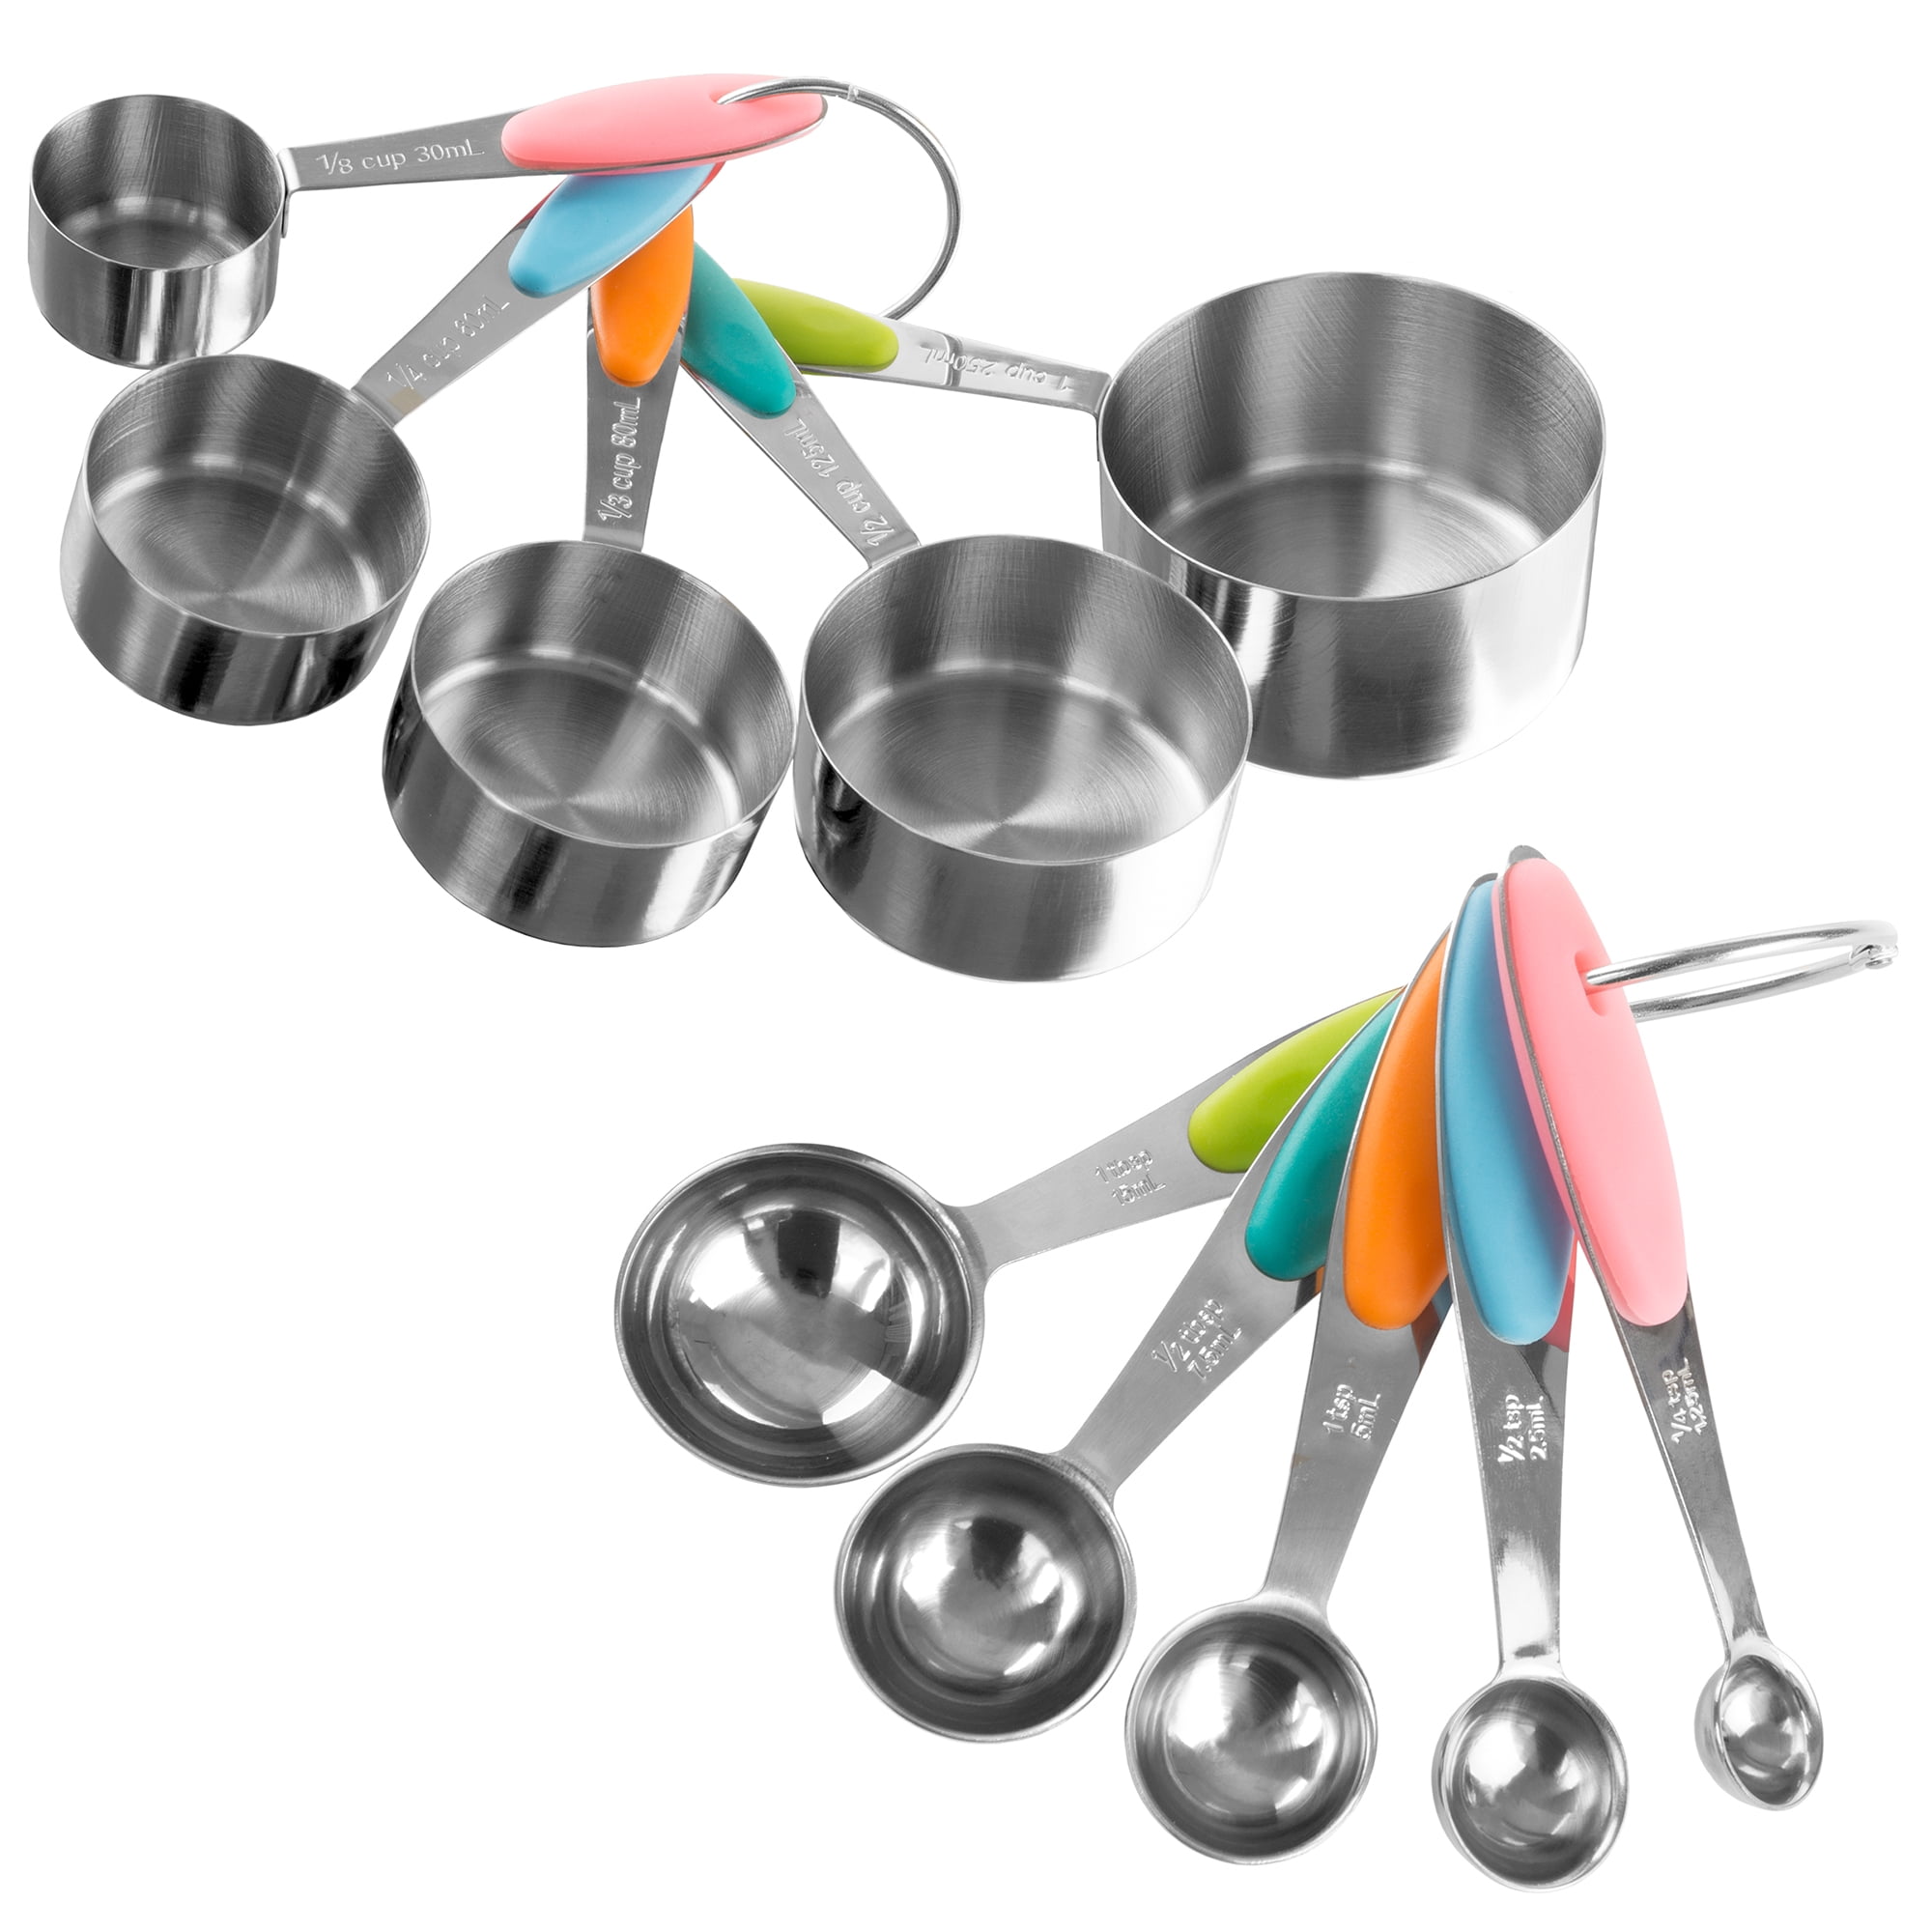  Heavy Duty Professional 10-pc Stainless Steel Measuring Cups  and Spoons Set with Riveted Handles, Polished Stackable Measuring Cup and  Measuring Spoon, Thick Gauge Steel, Built to Last a Lifetime: Home 